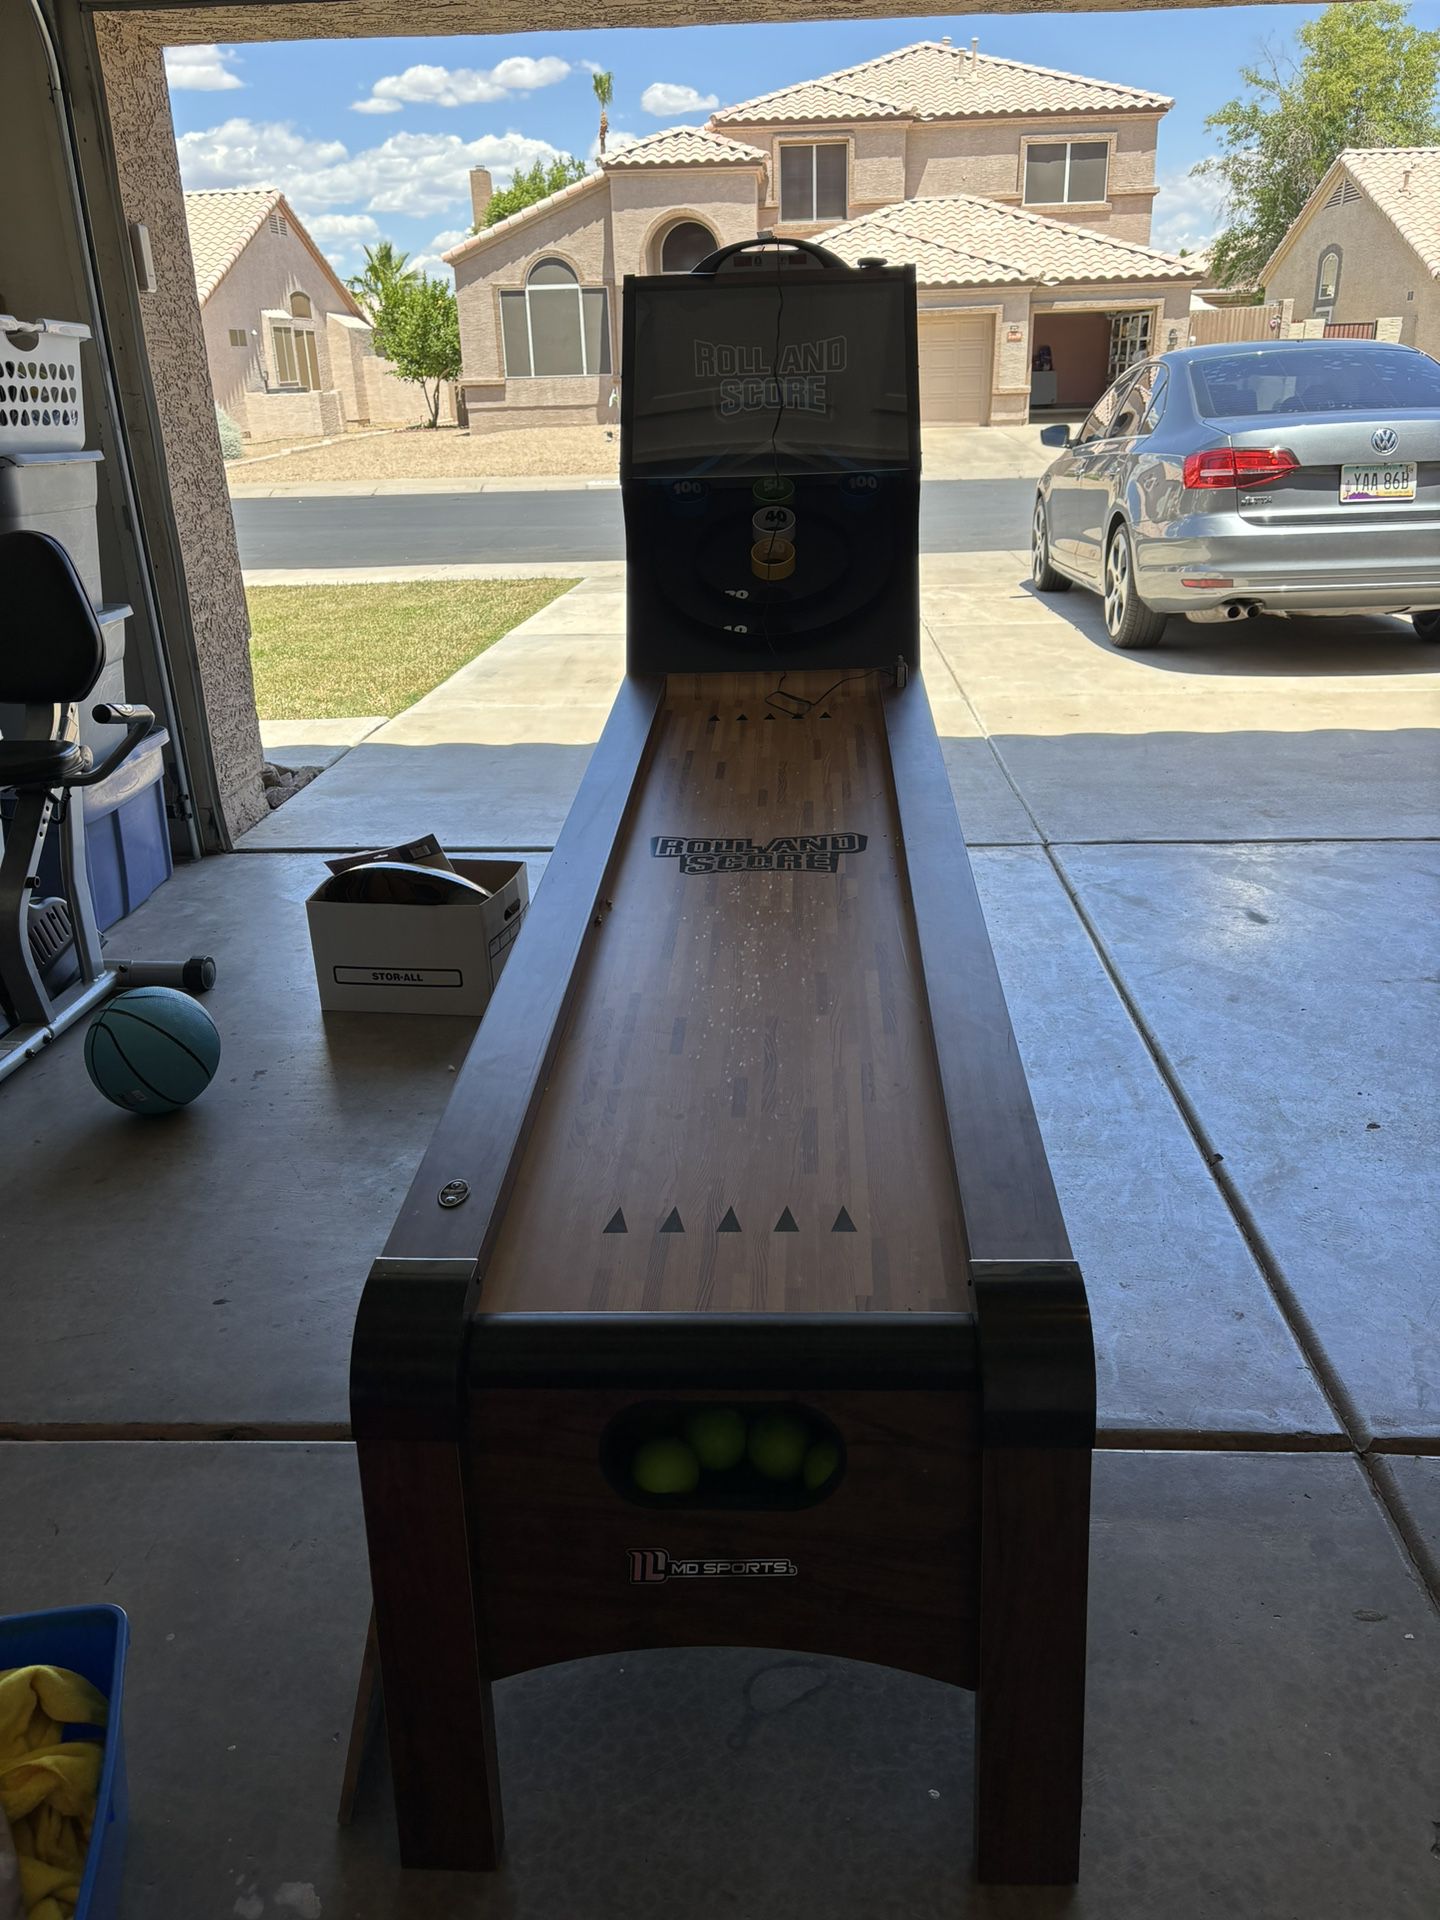 Roll And Score Arcade Game 